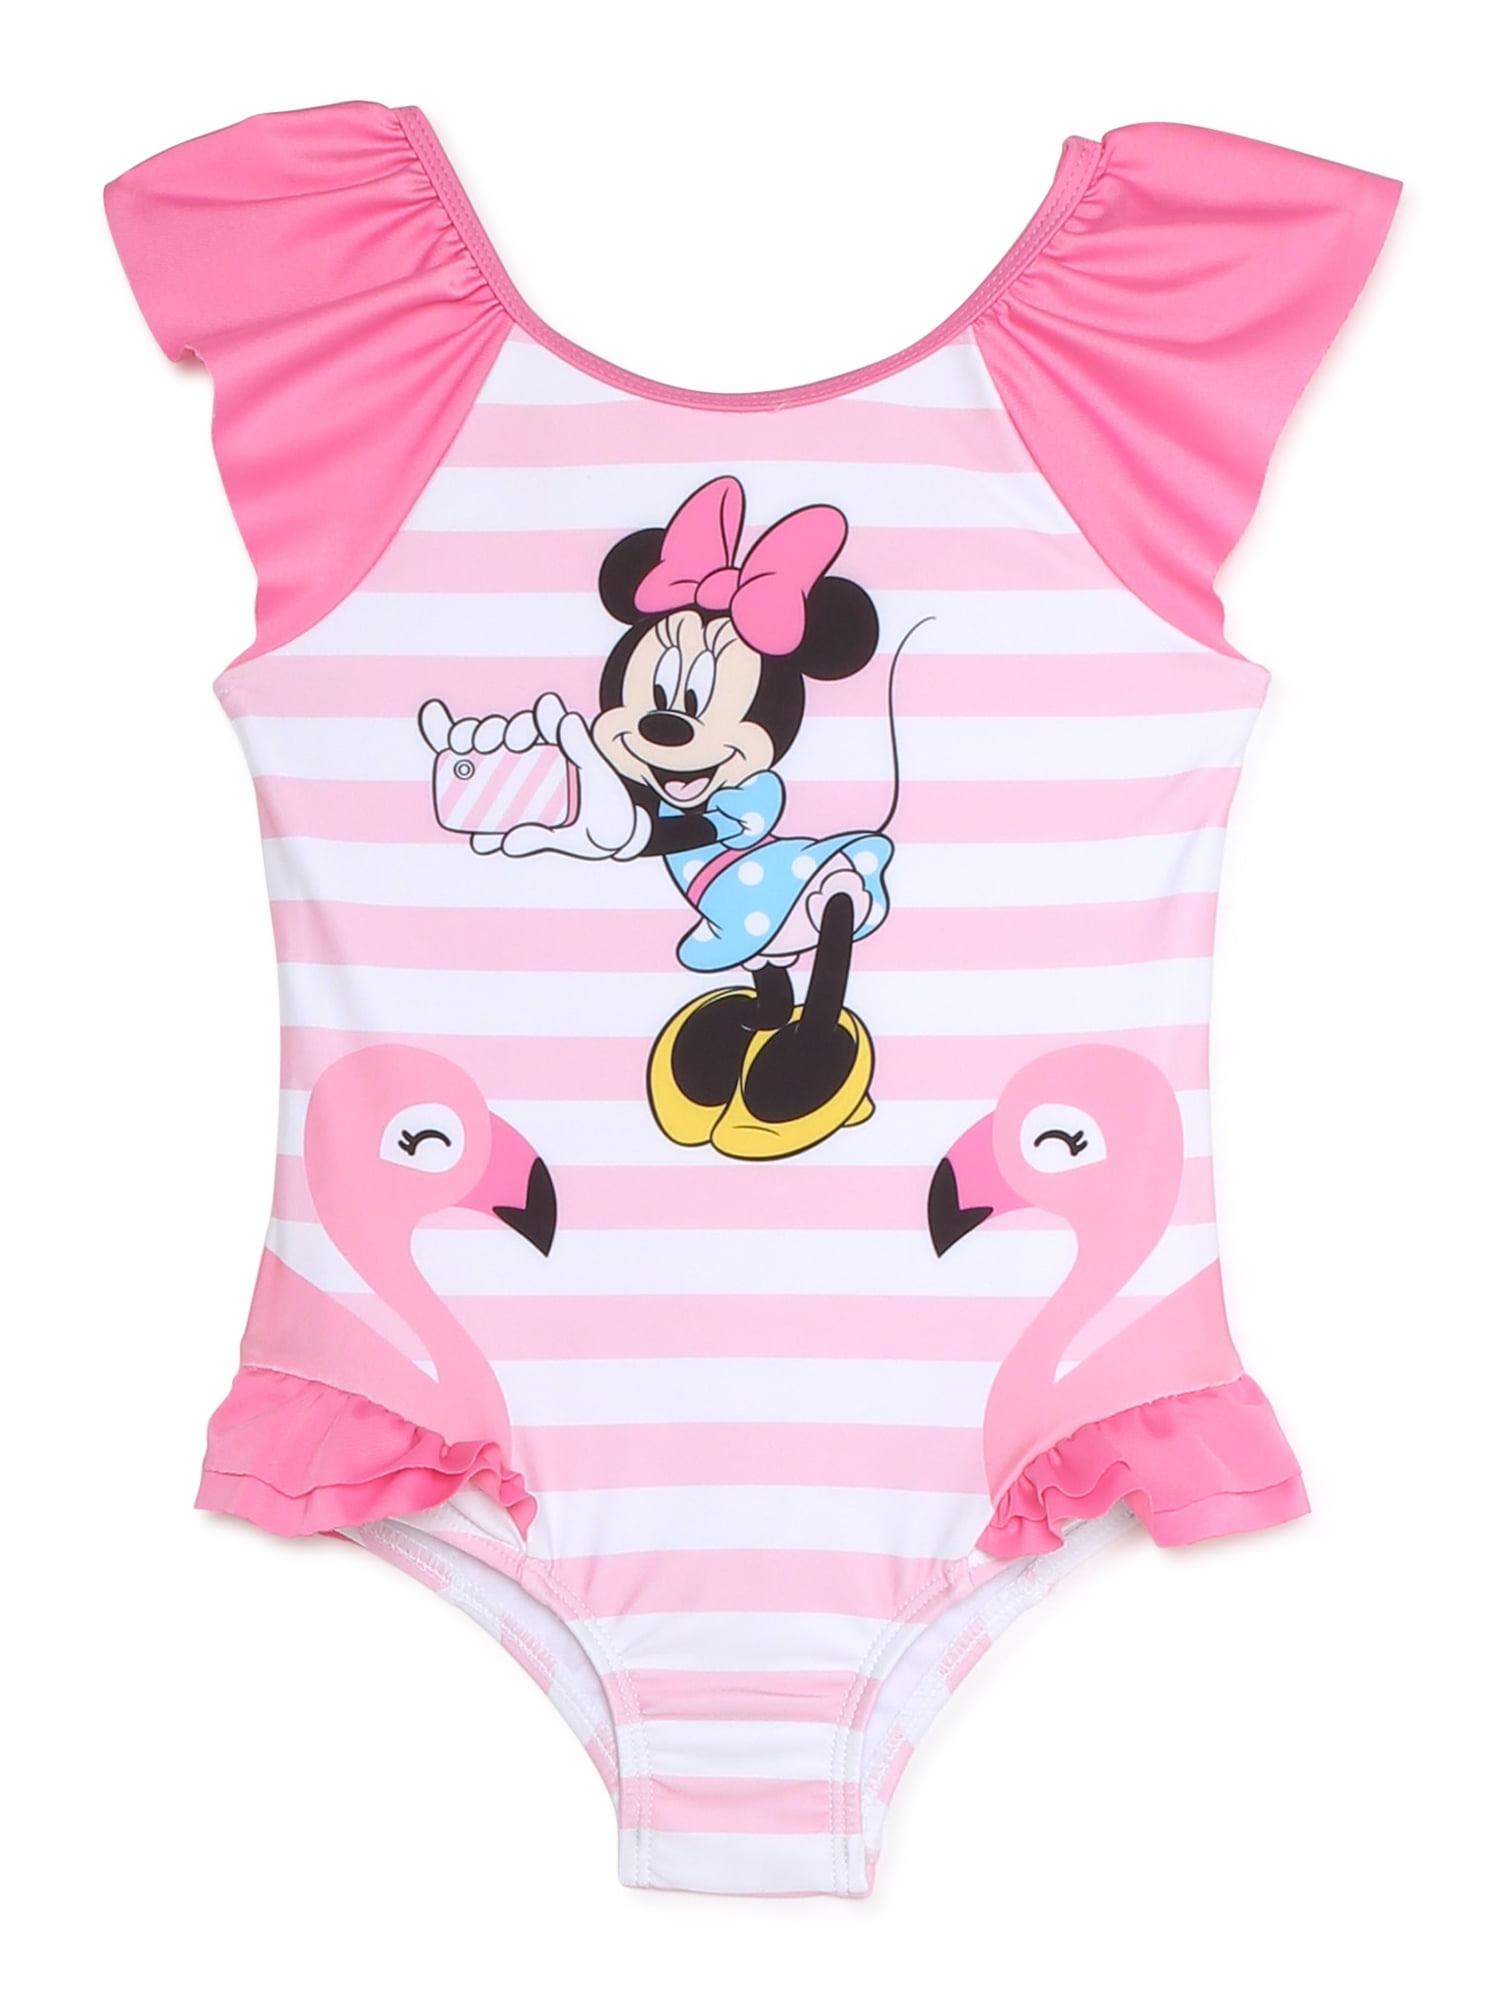 BRAND NEW DISNEY MINNIE MOUSE SWIMSUIT & COVER UP TOWEL DRESS 2-PIECE SET PINK 